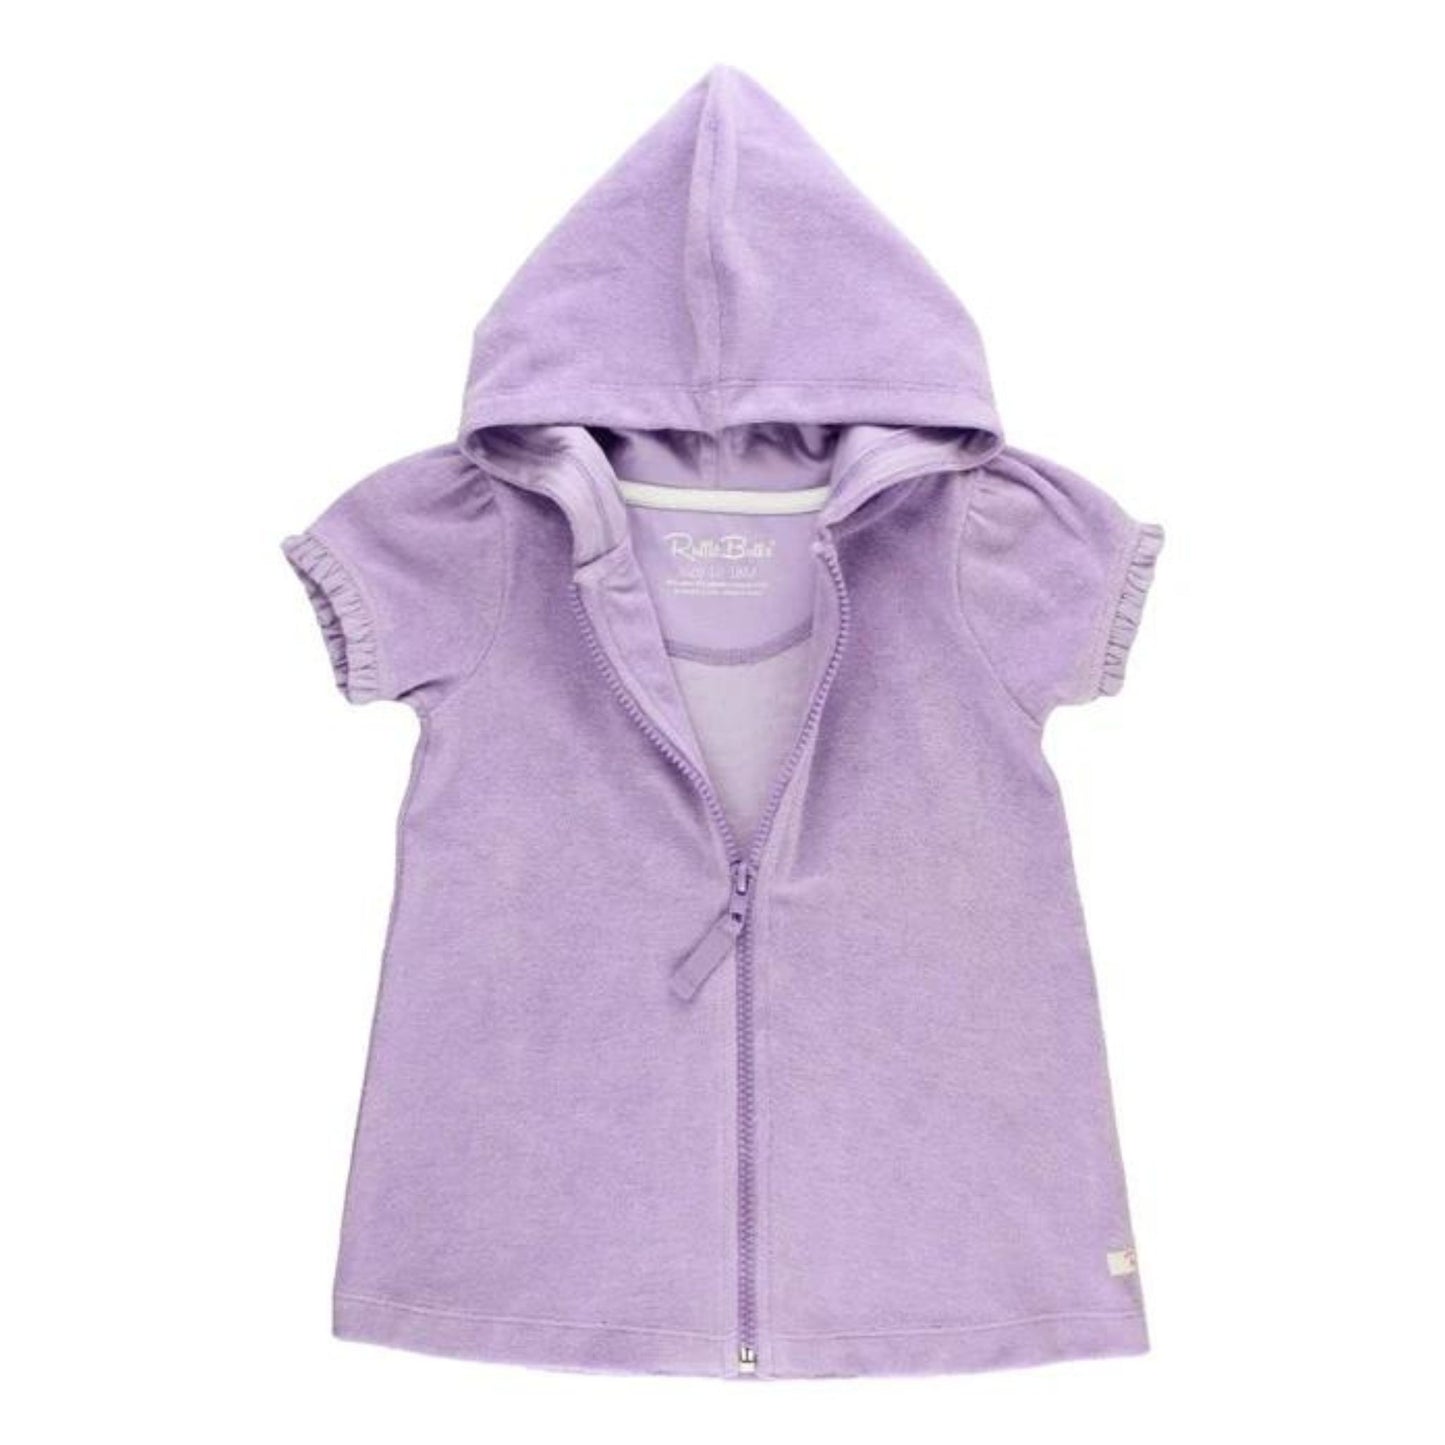 Terry Cloth Full-zip Cover-up